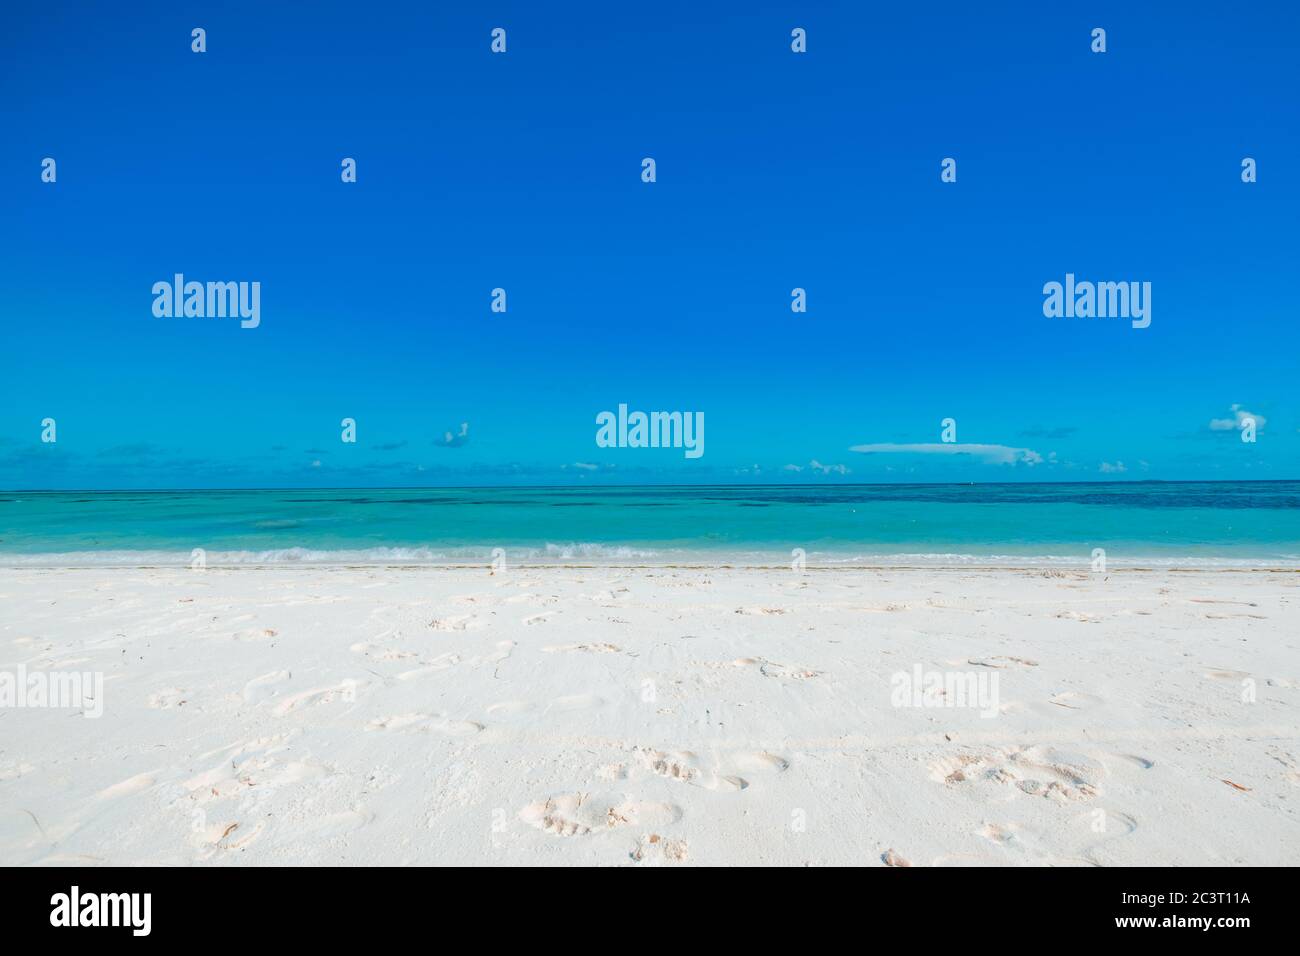 White sand beach with turquoise water and blue sky. Beach landscape, tropical nature pattern with copy space. Peaceful, relax, tranquility view Stock Photo